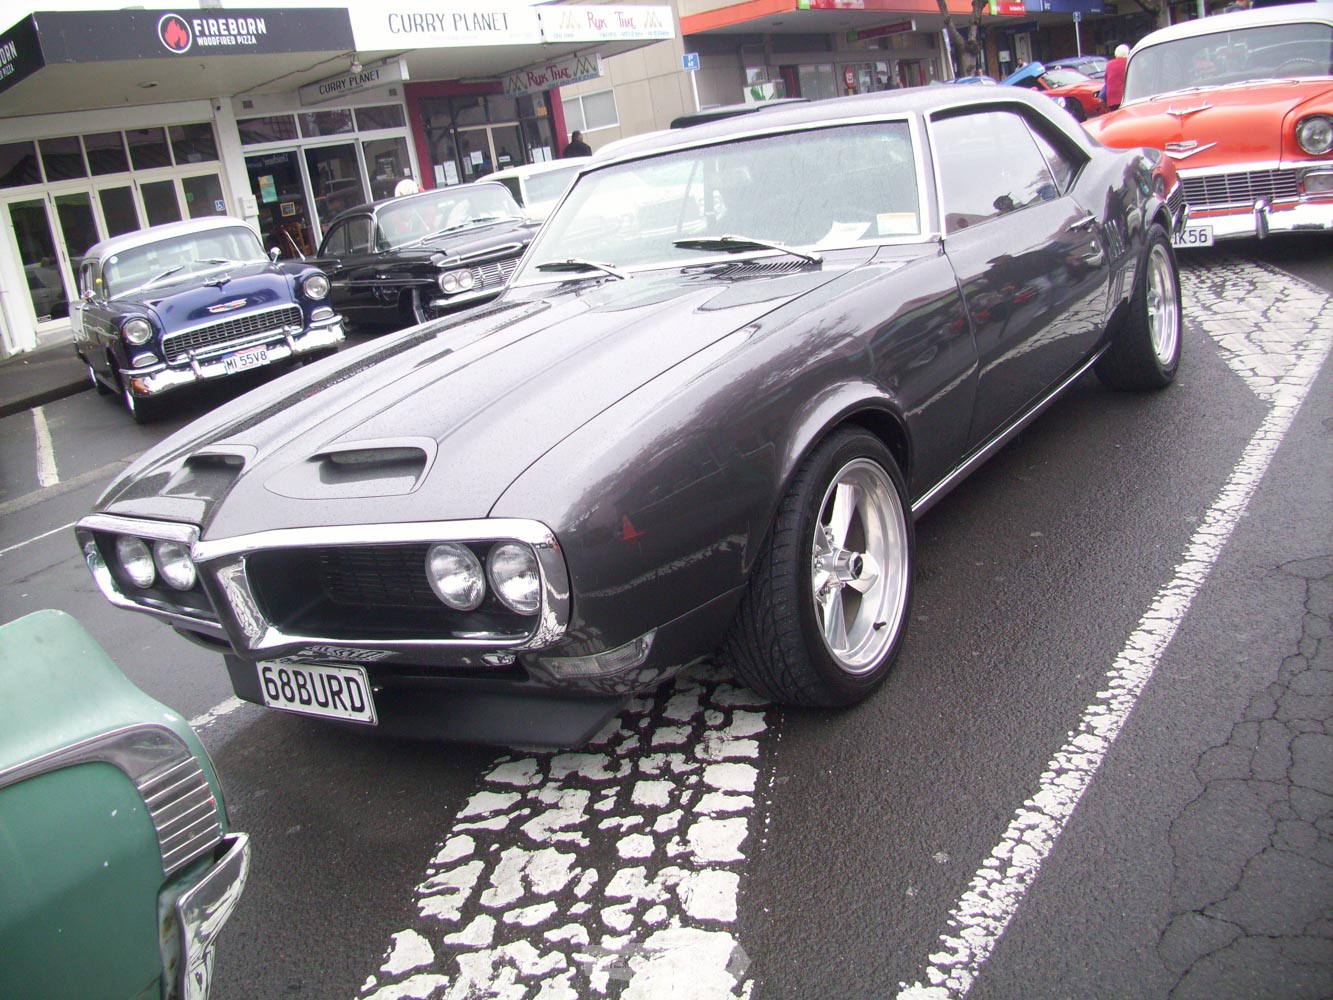 Alan Hunt from Ohauiti in Tauranga has owned this 1968 Pontiac Firebird for many years. Its a real tidy_.jpg